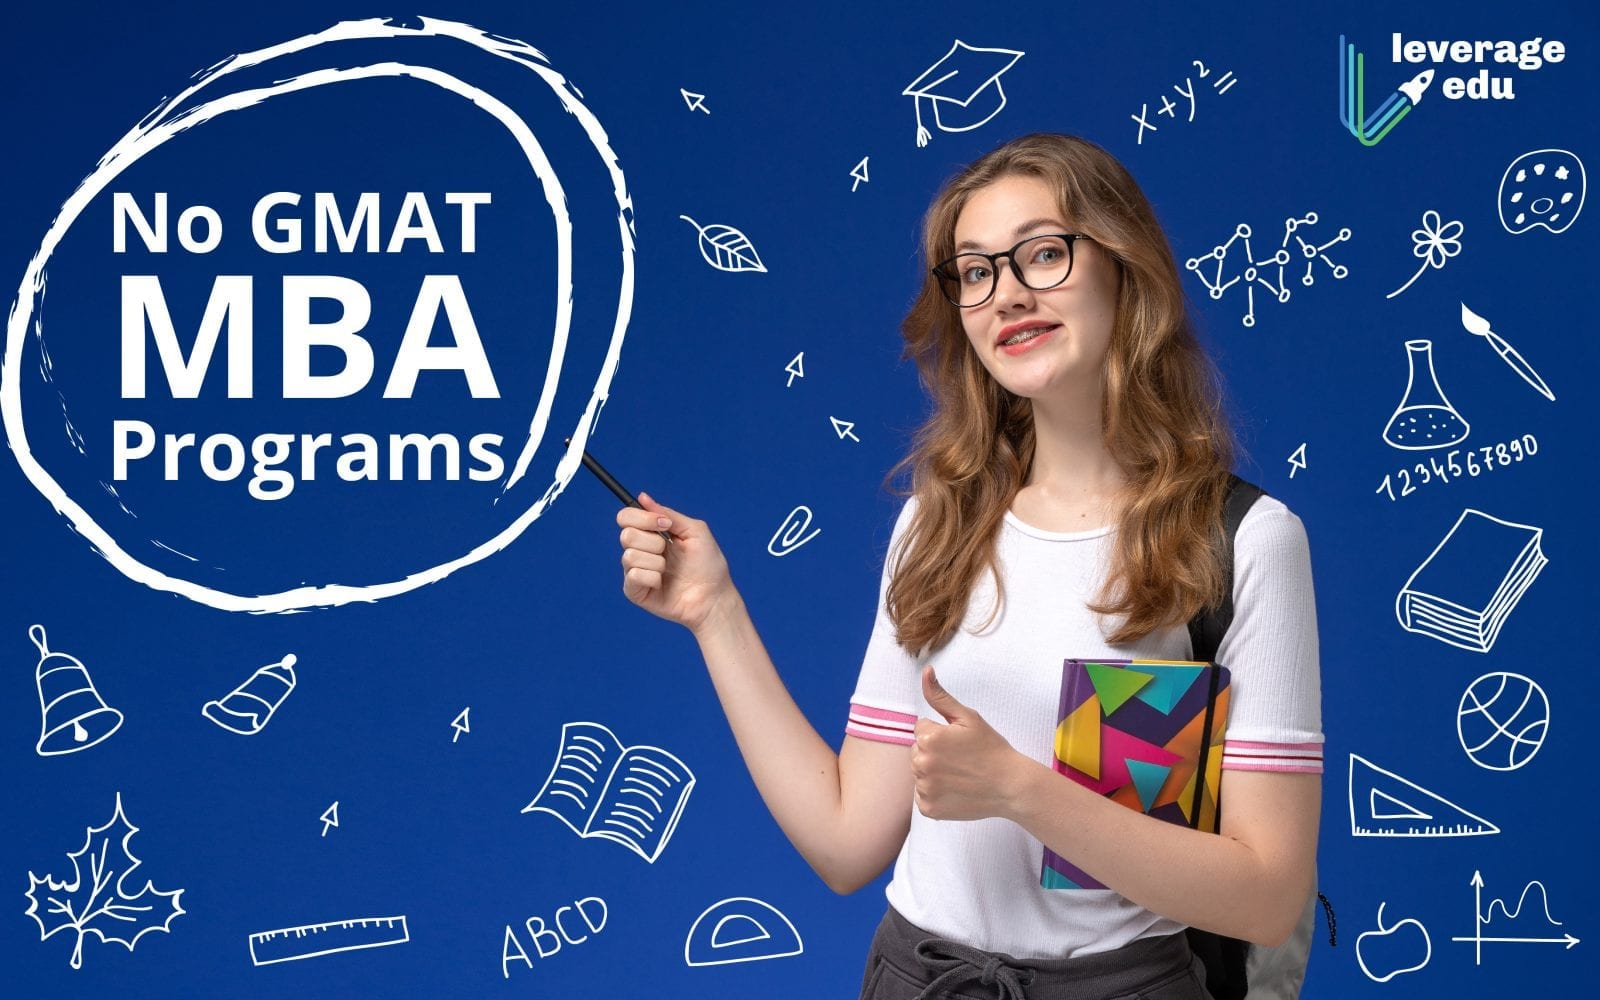 The Best No GMAT MBA Programs in 2021! - Leverage Edu